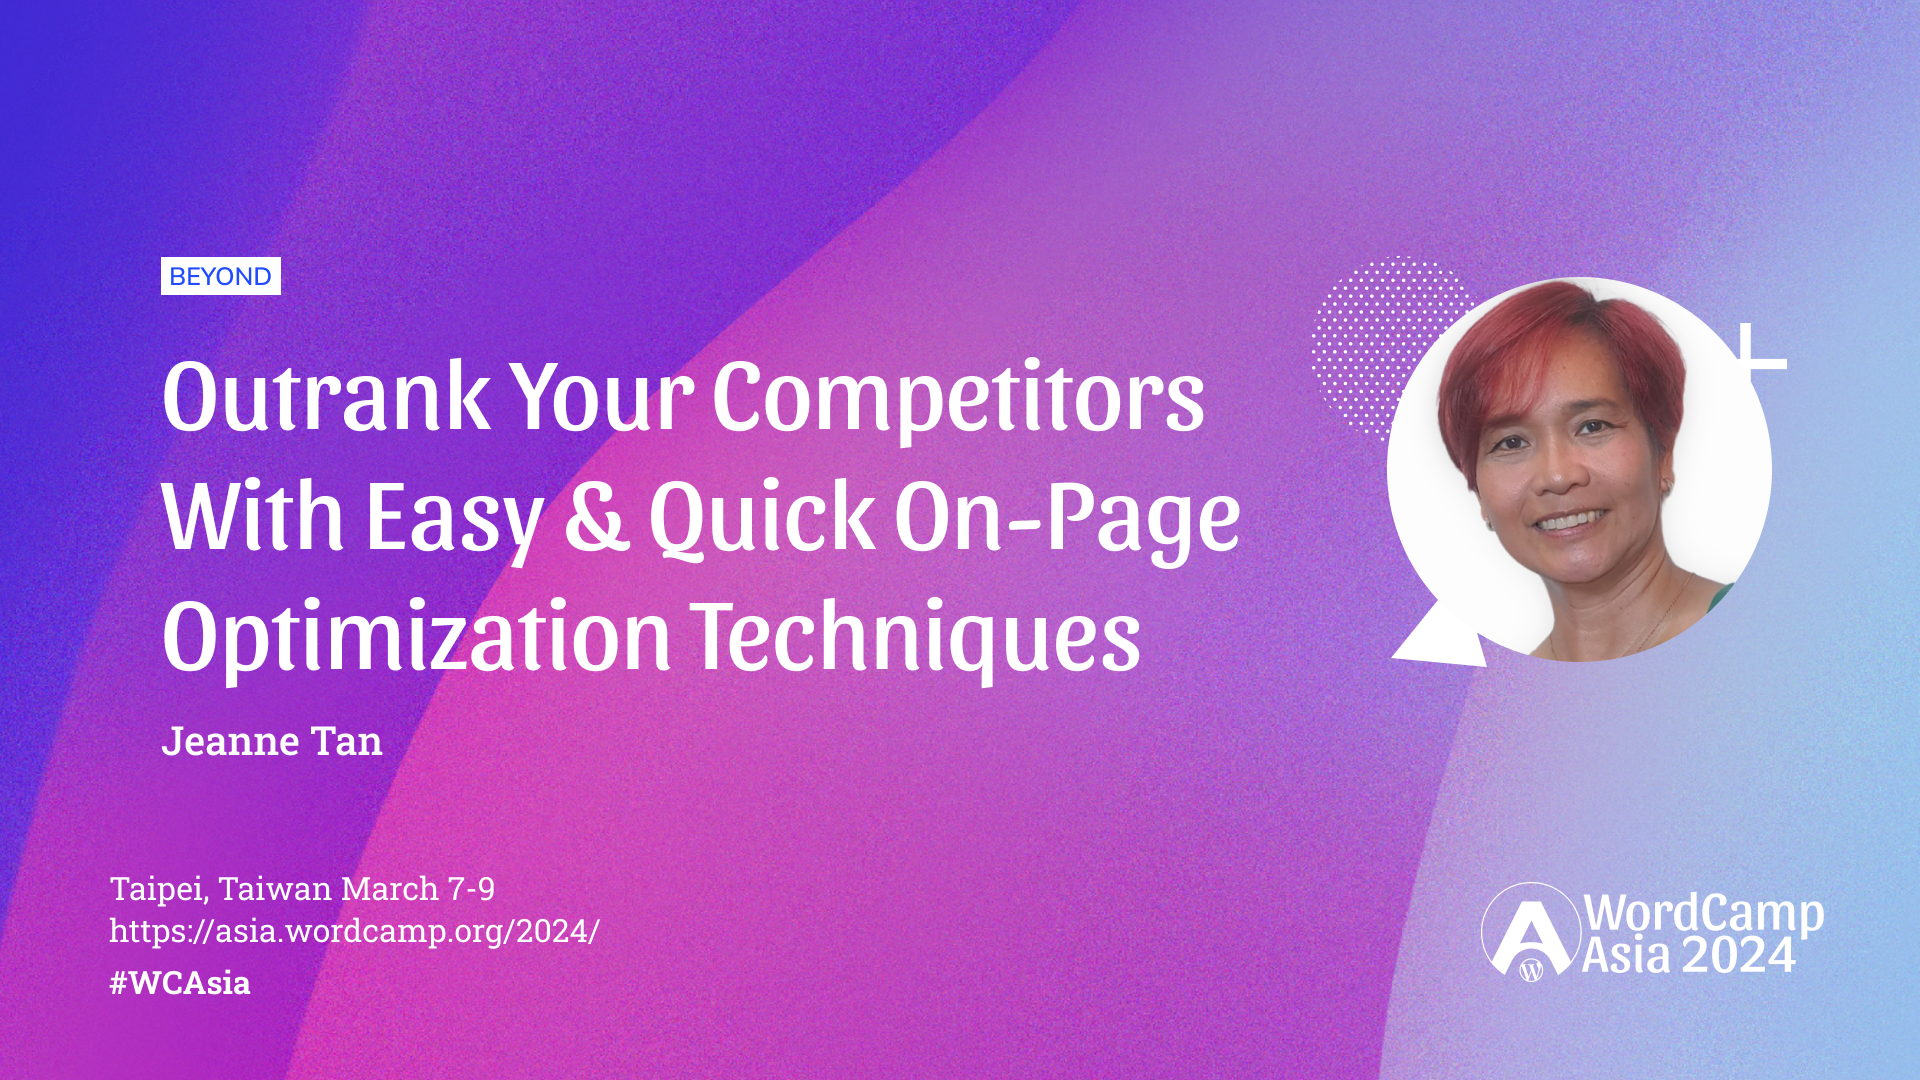 Outrank Your Competitors With Easy & Quick On-Page Optimization Techniques